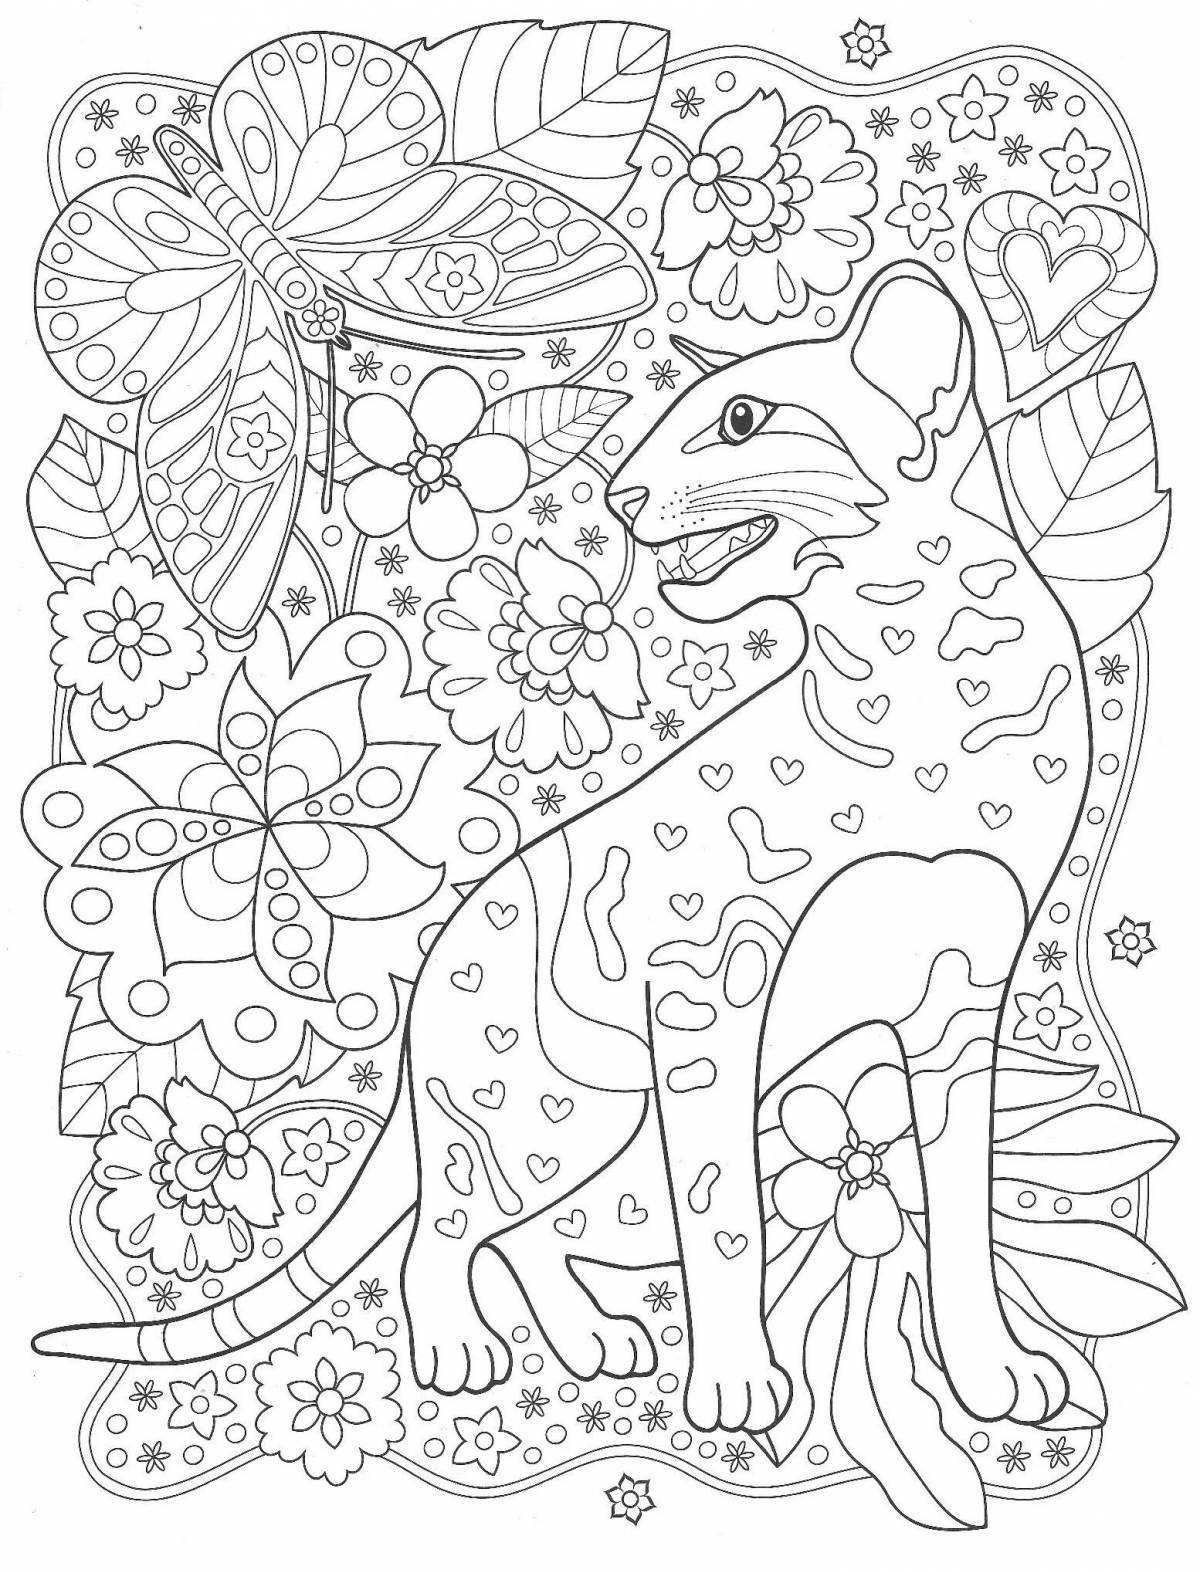 Color explosion coloring book for 10 year olds